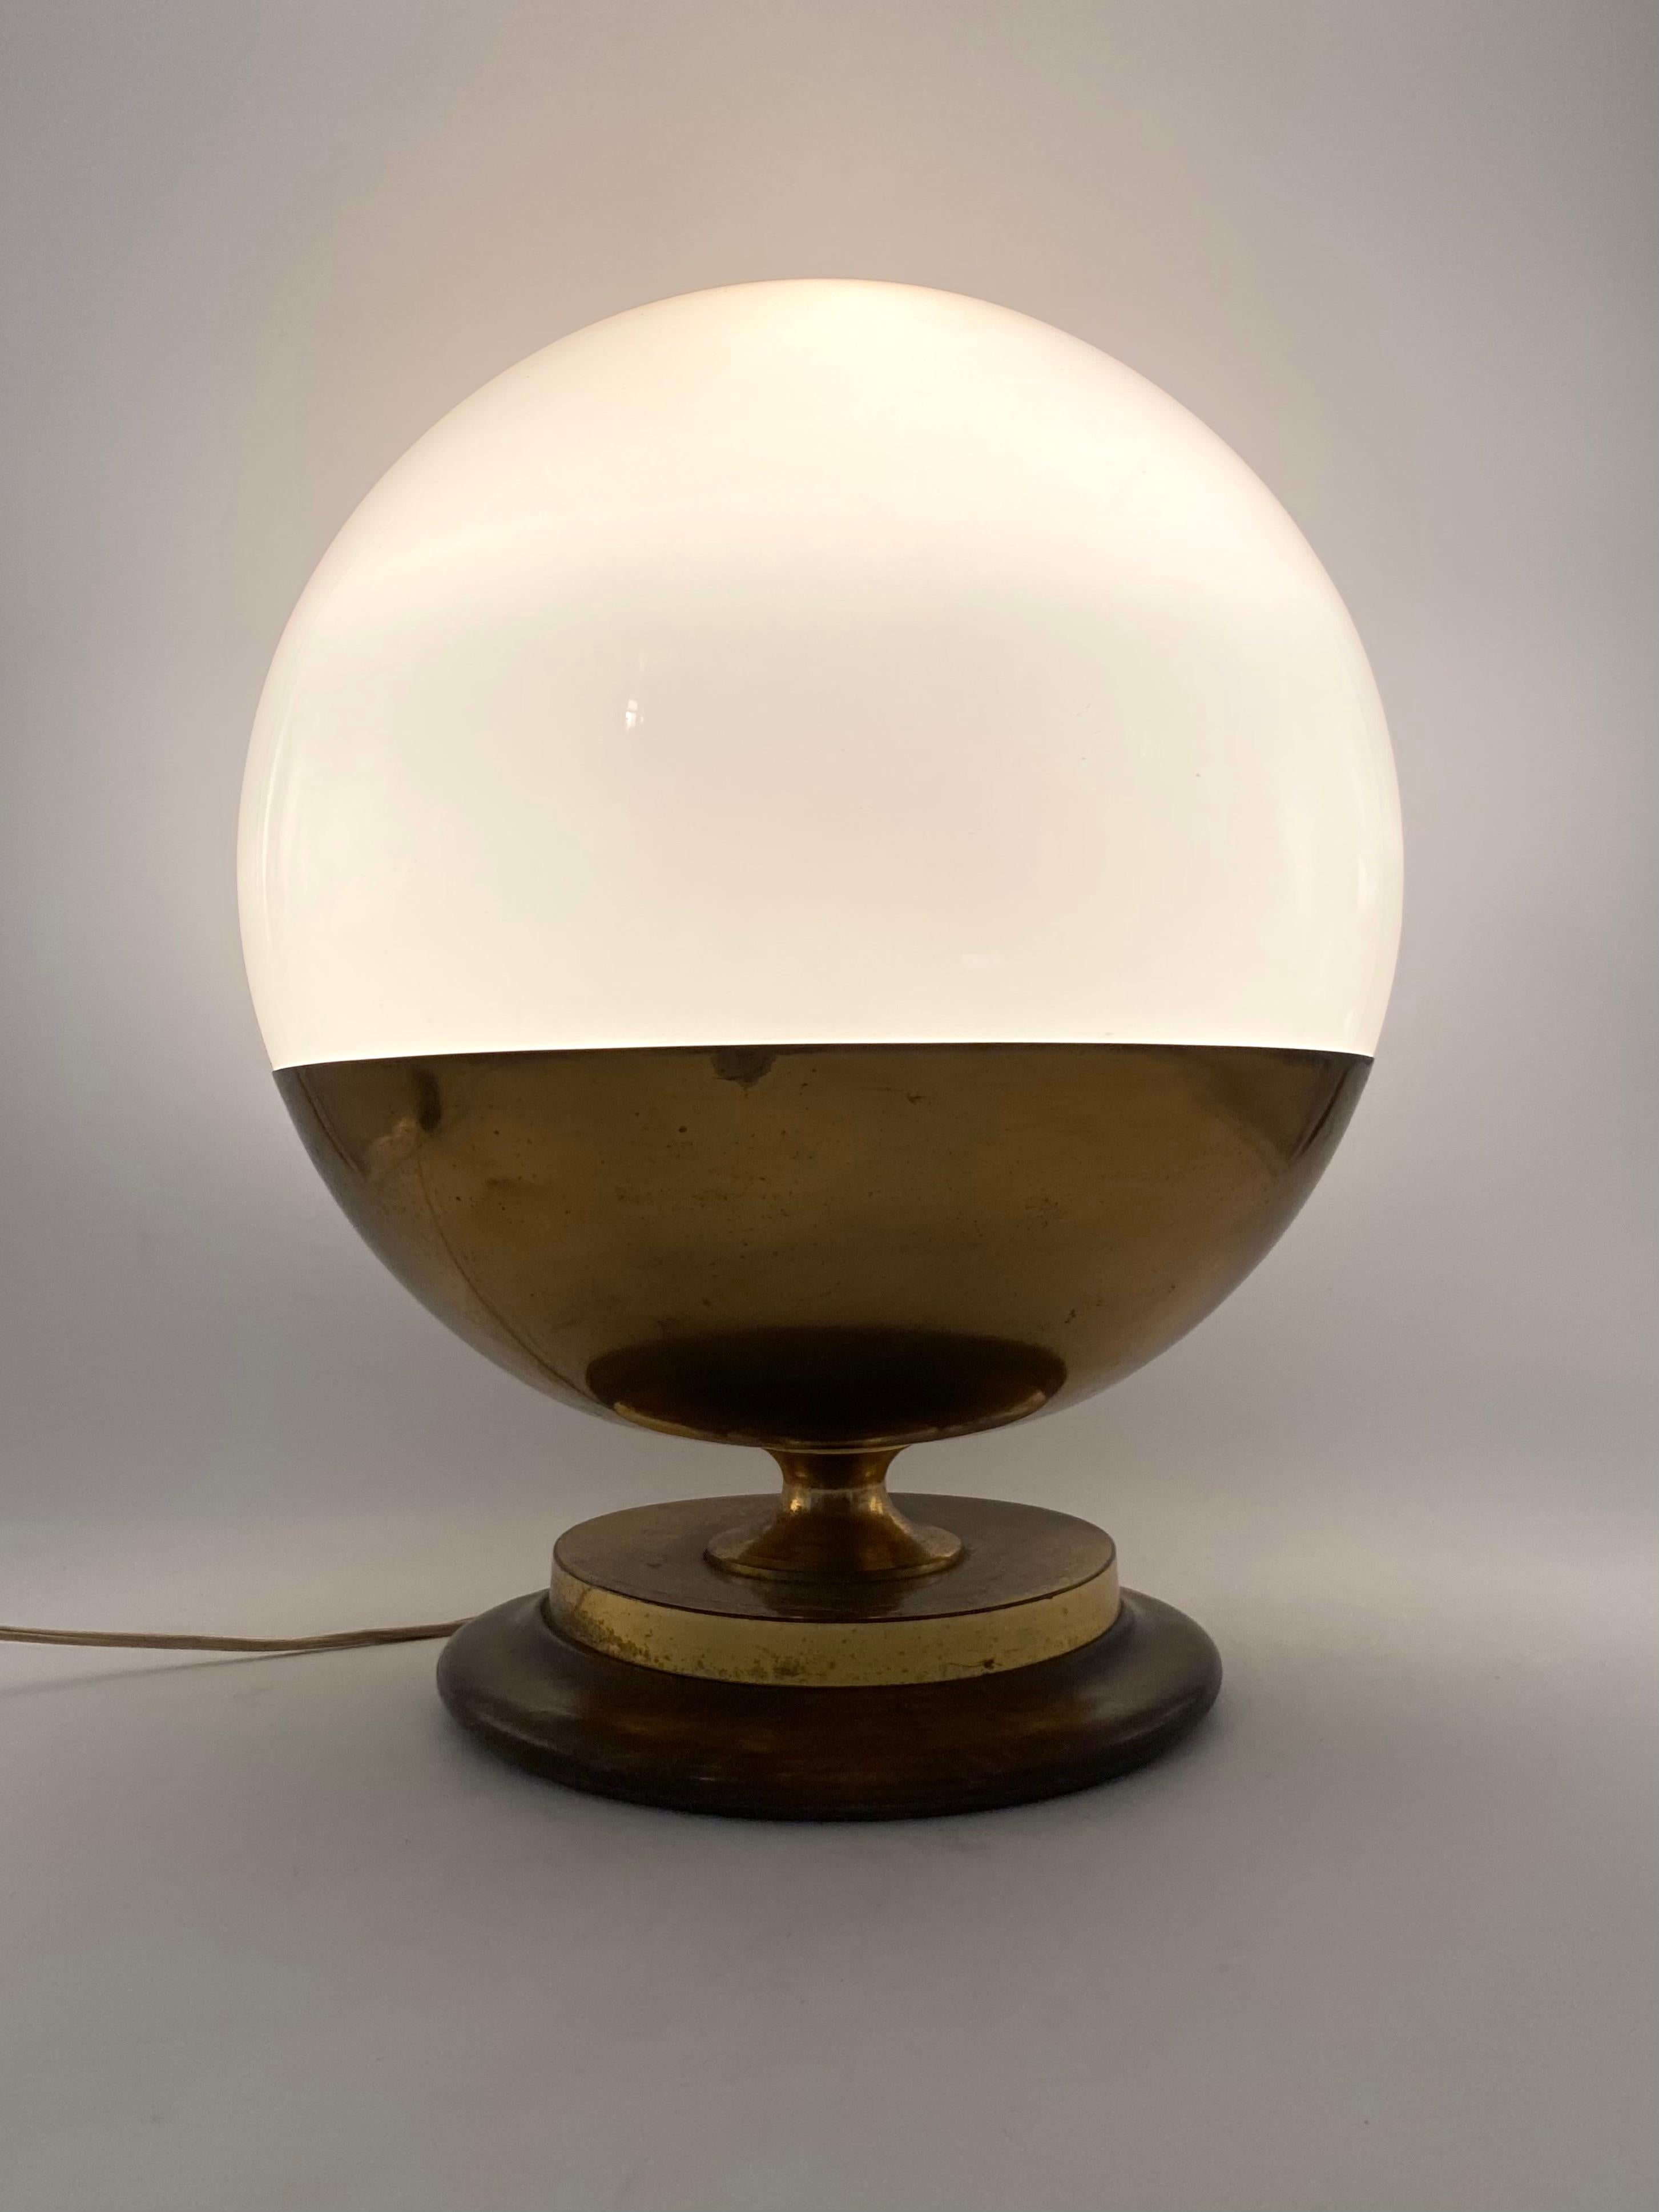 Important Midcentury Spherical Murano Glass Table Lamp, Mazzega, Italy, 1960s For Sale 5